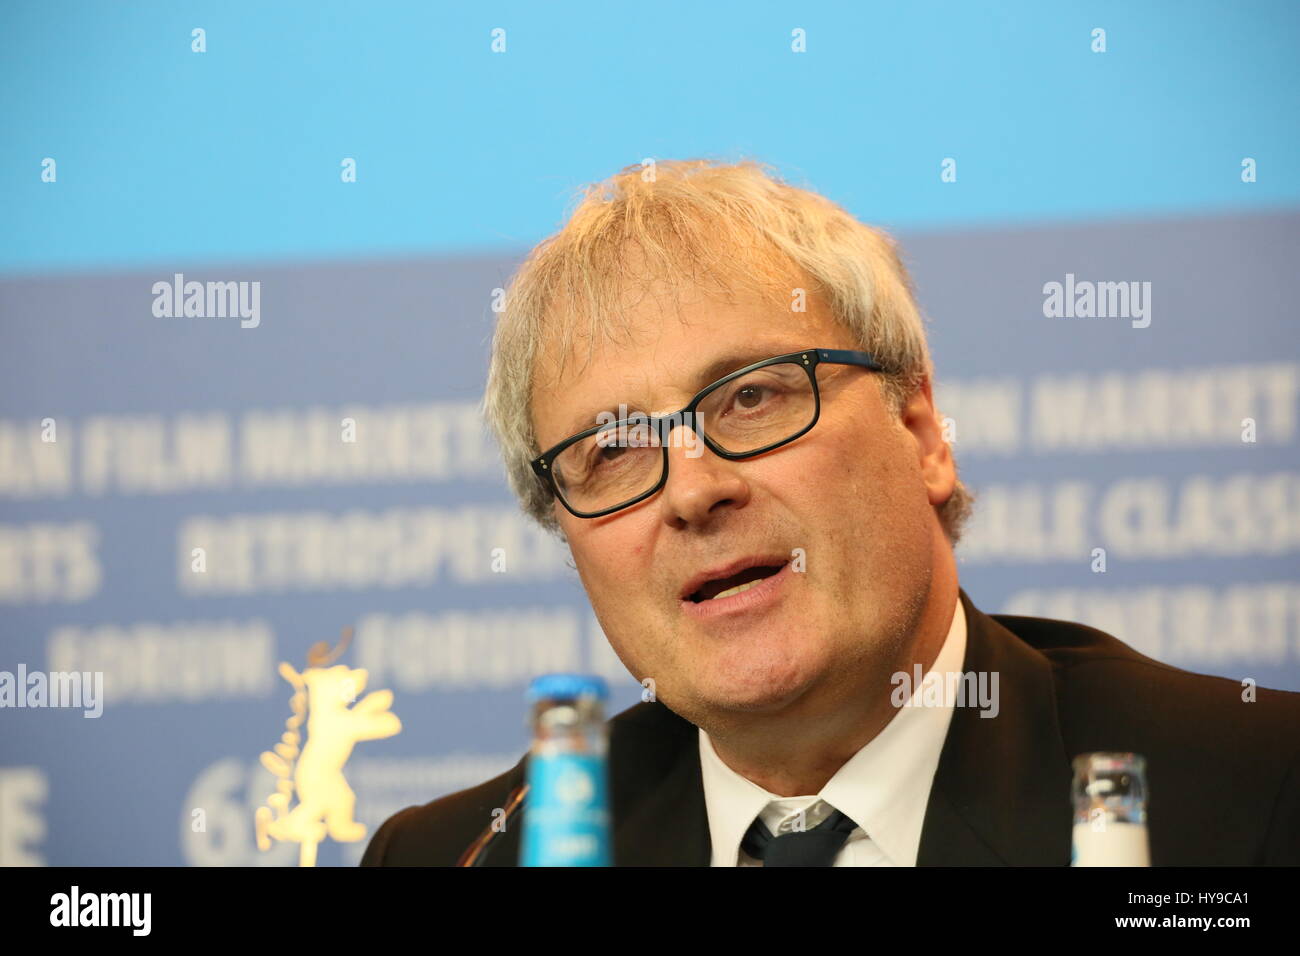 Berlin, Germany, February 9th, 2015: Berlinale conference of the film 'Woman in Gold'. Stock Photo